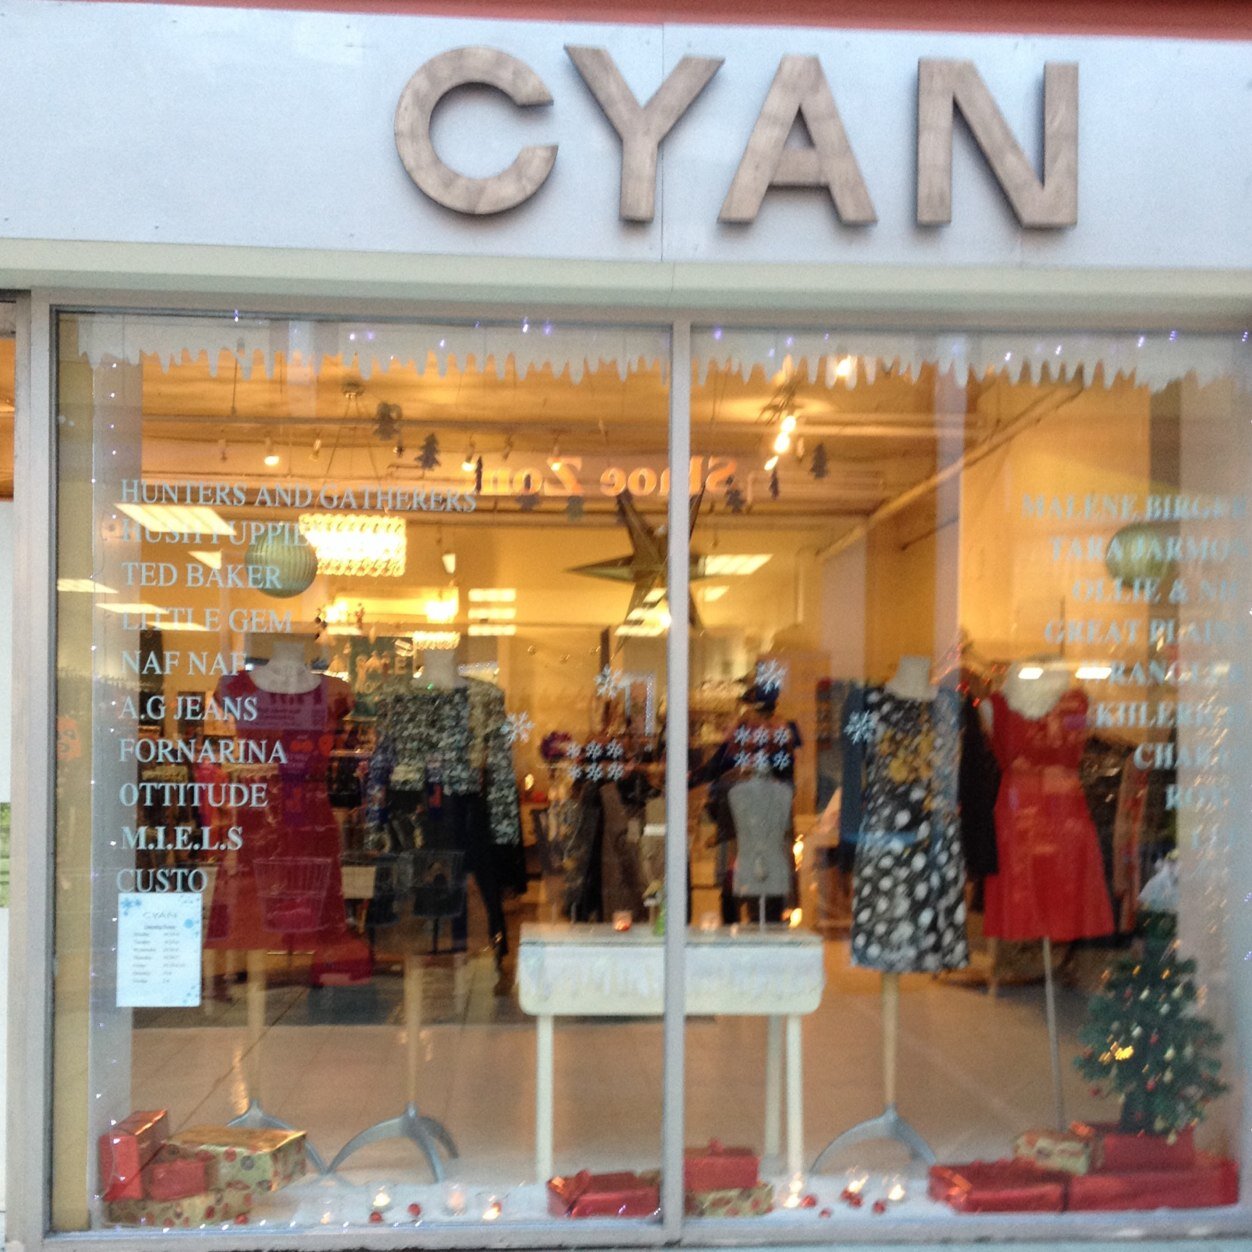 This is a new Twiter Page for Cyan Boutique. Cyan had been in Rathmines for over 20 years and is still going strong thanks to its loyal cliental.